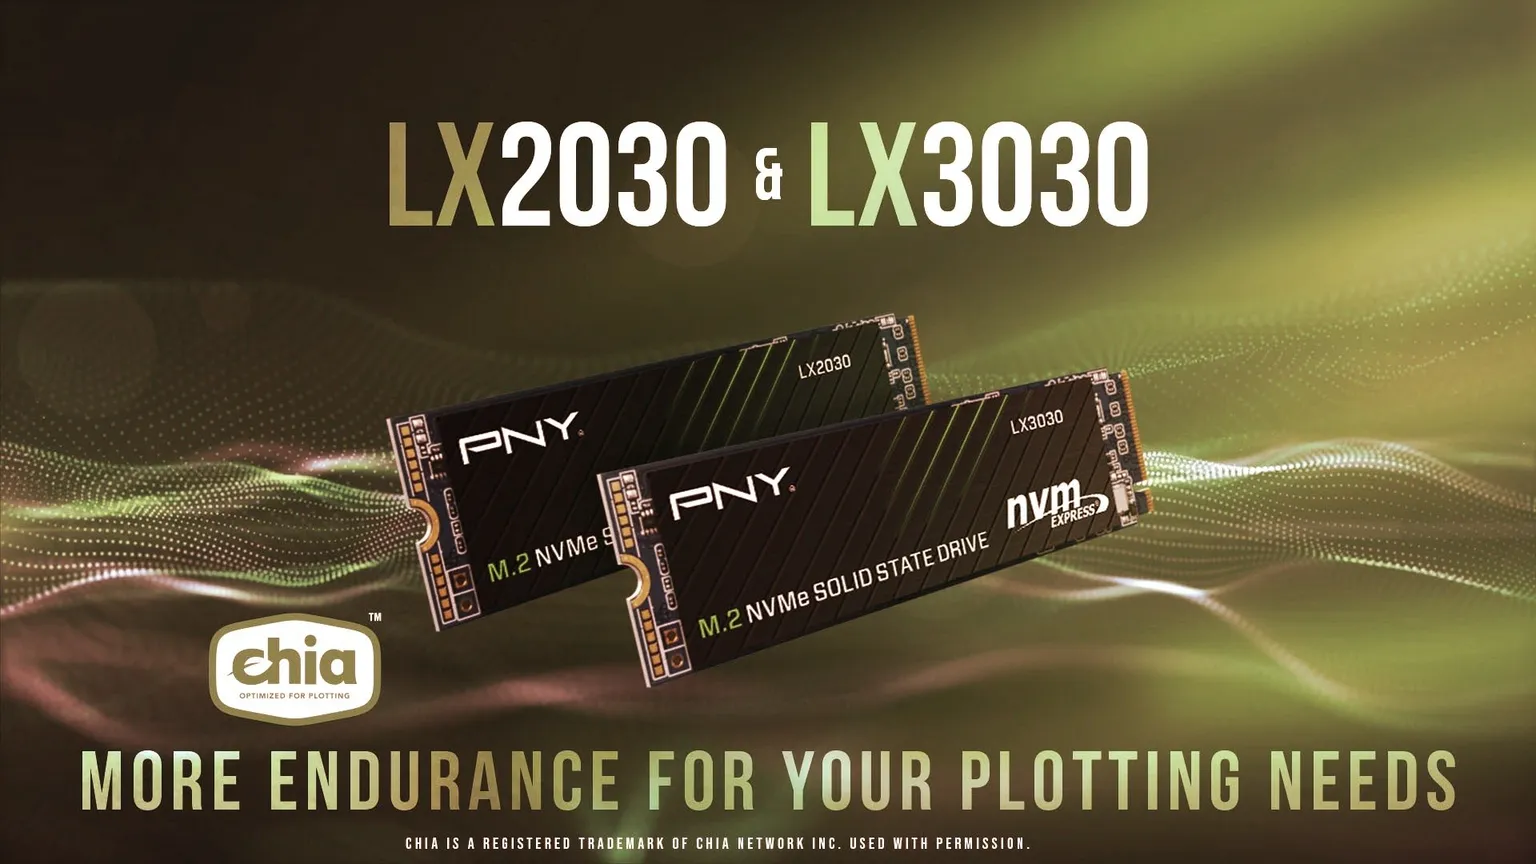 The PNY LX2030 and LX3030 SSDs are certified for Chia farming. Image: PNY